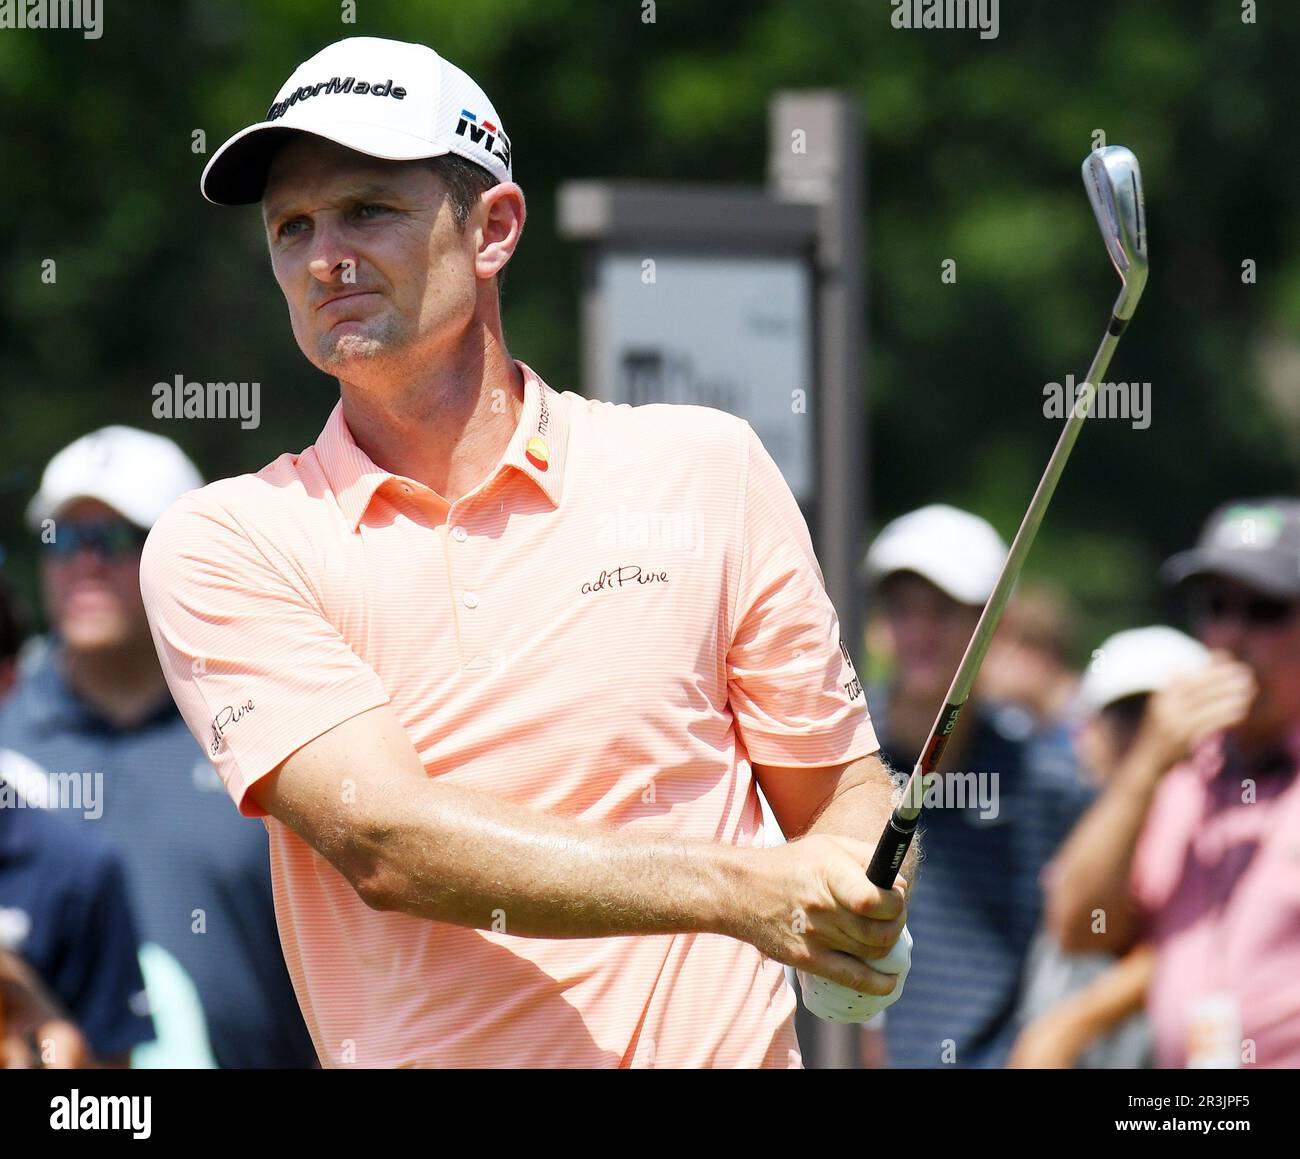 Fort Worth, USA. 26th May, 2018. Justin Rose watches his tee shot playing the 10th hole during the third round of the Fort Worth Invitational PGA tournament at the Colonial Country Club, Saturday, May 26, 2018, in Fort Worth, Texas. (Photo by Bob Booth/For Worth Star-Telegram/TNS/Sipa USA) Credit: Sipa USA/Alamy Live News Stock Photo